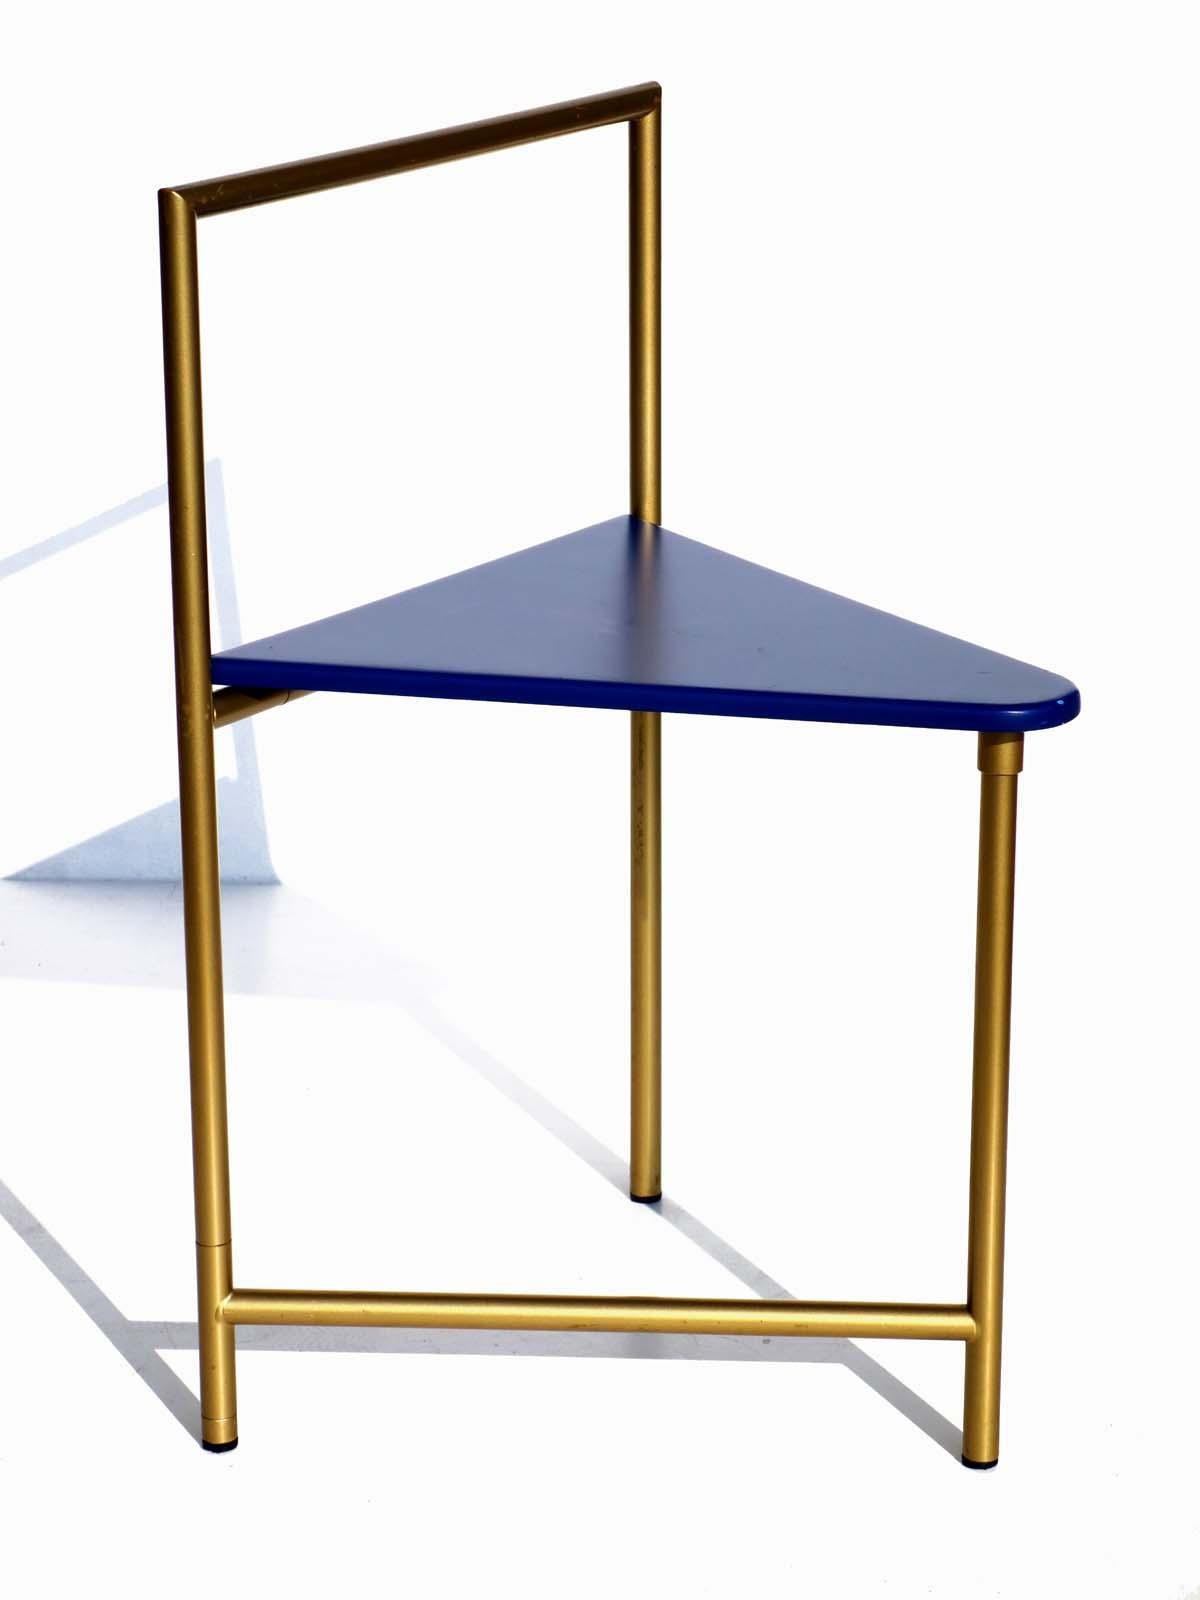 Rare folding chair blue plastic seat and gold metal frame
Manufacture sticker label.